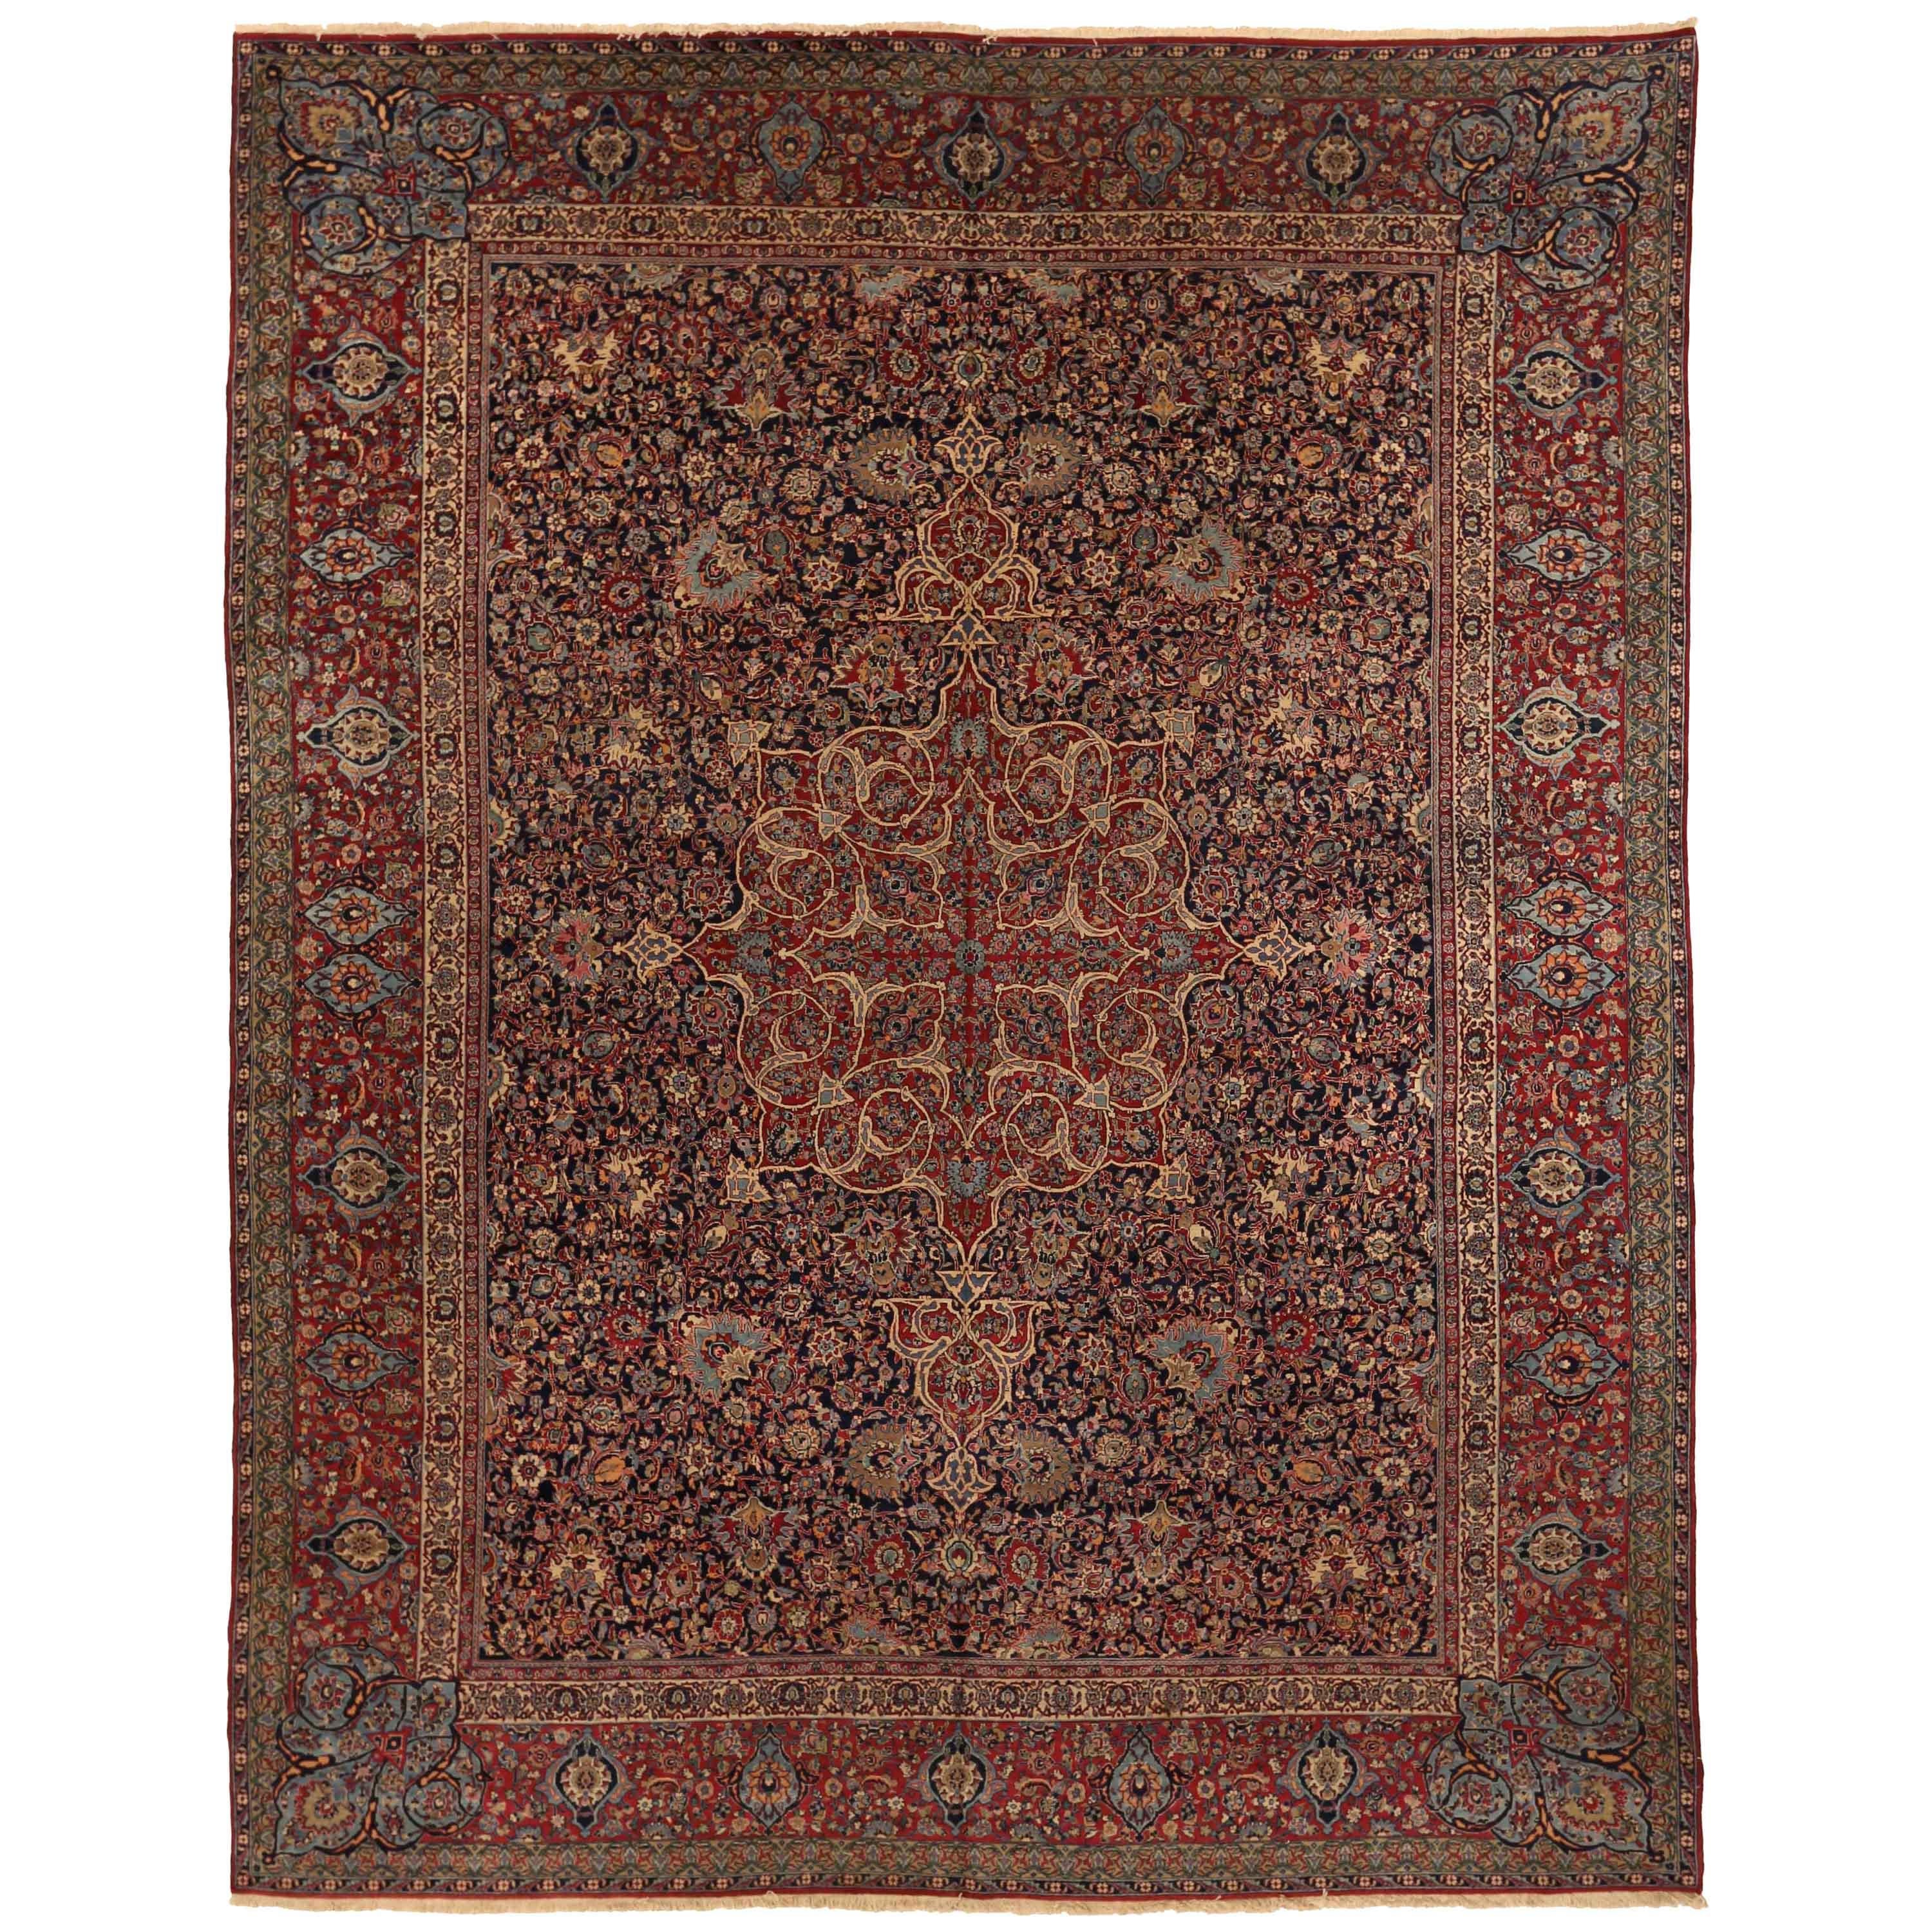 Antique Persian Tehran Rug with Grand Medallion and Floral Patterns, circa 1920s For Sale